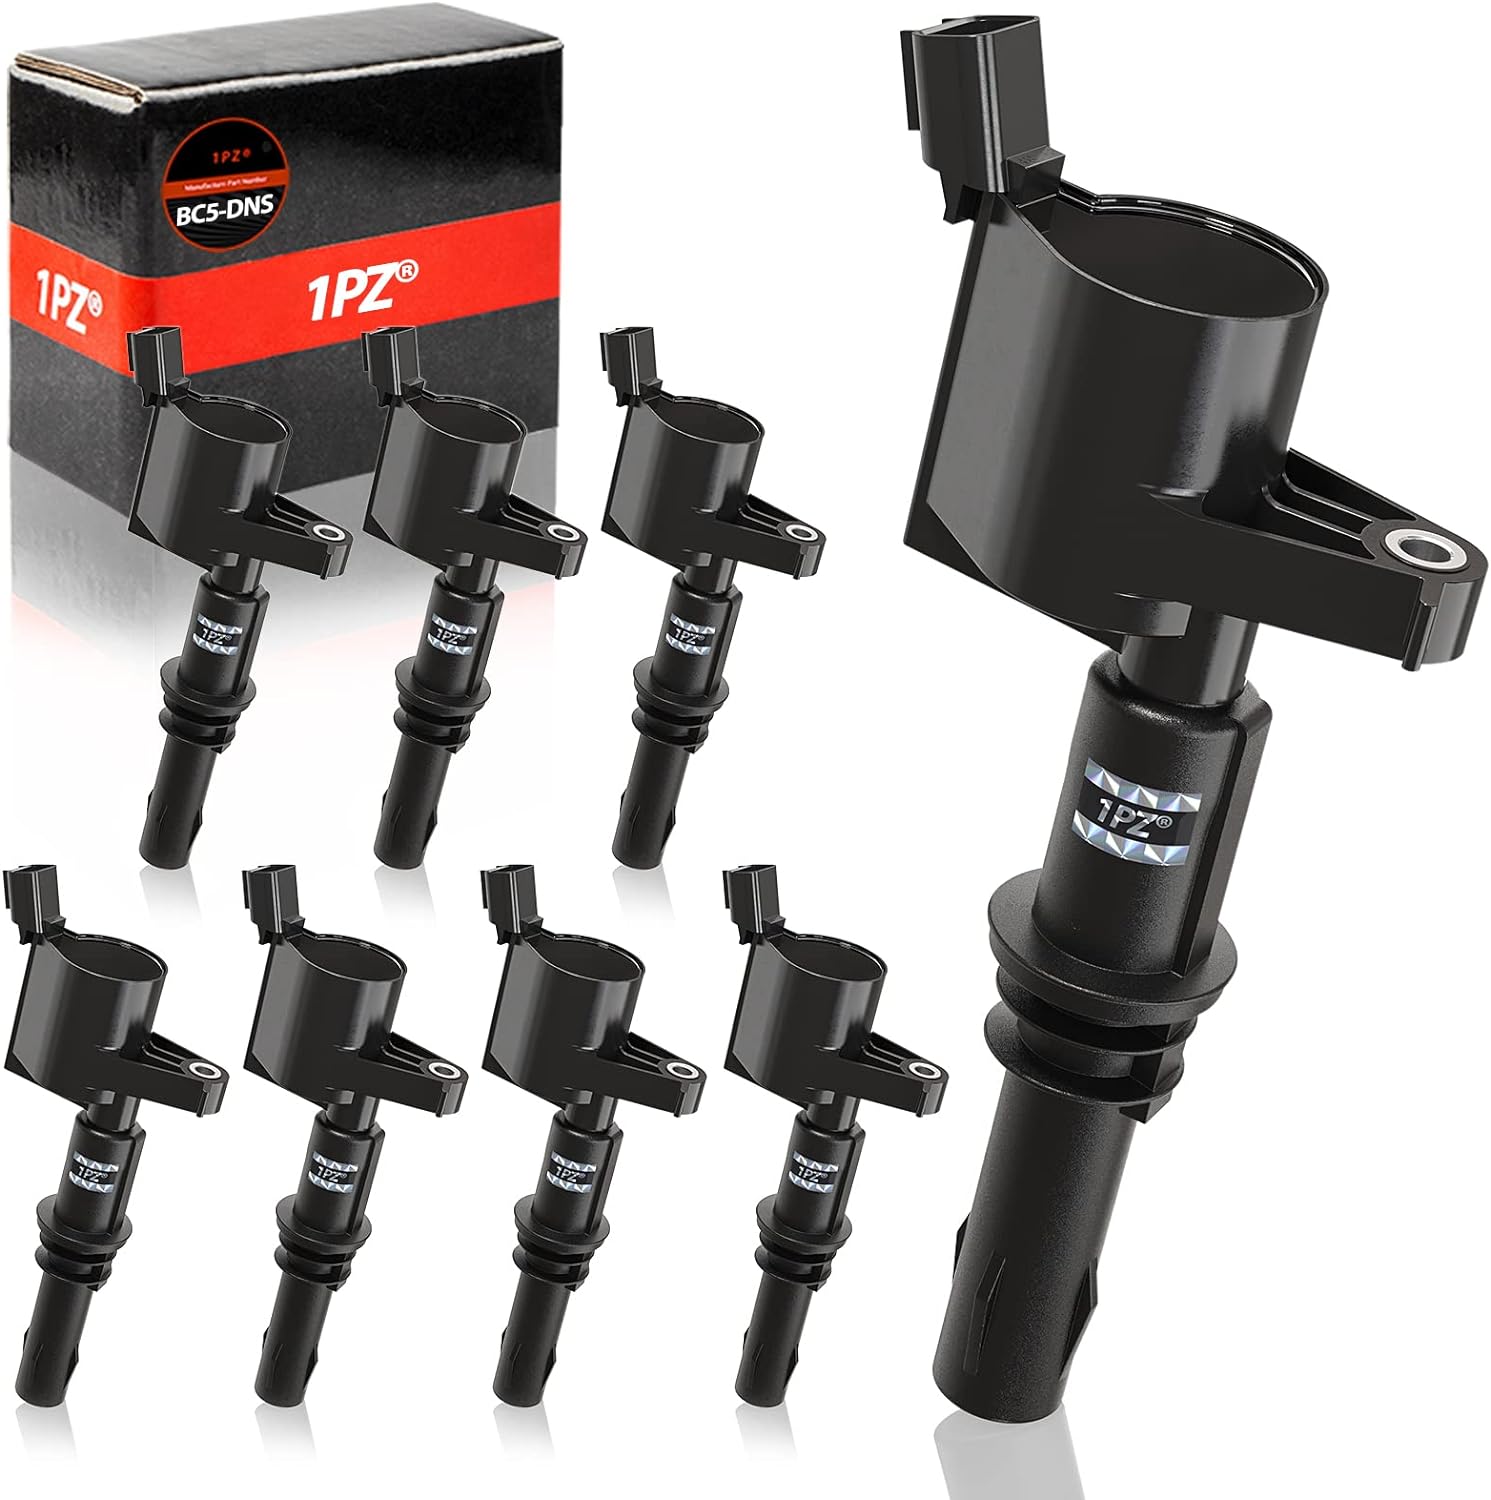 1PZ Set of 8 Ignition Coil Pack Replacement for Ford Expedition F150 F250 F350 Super Duty Lincoln Mark Navigator DG511 C1541 FD508 5C1584 E508 C1659